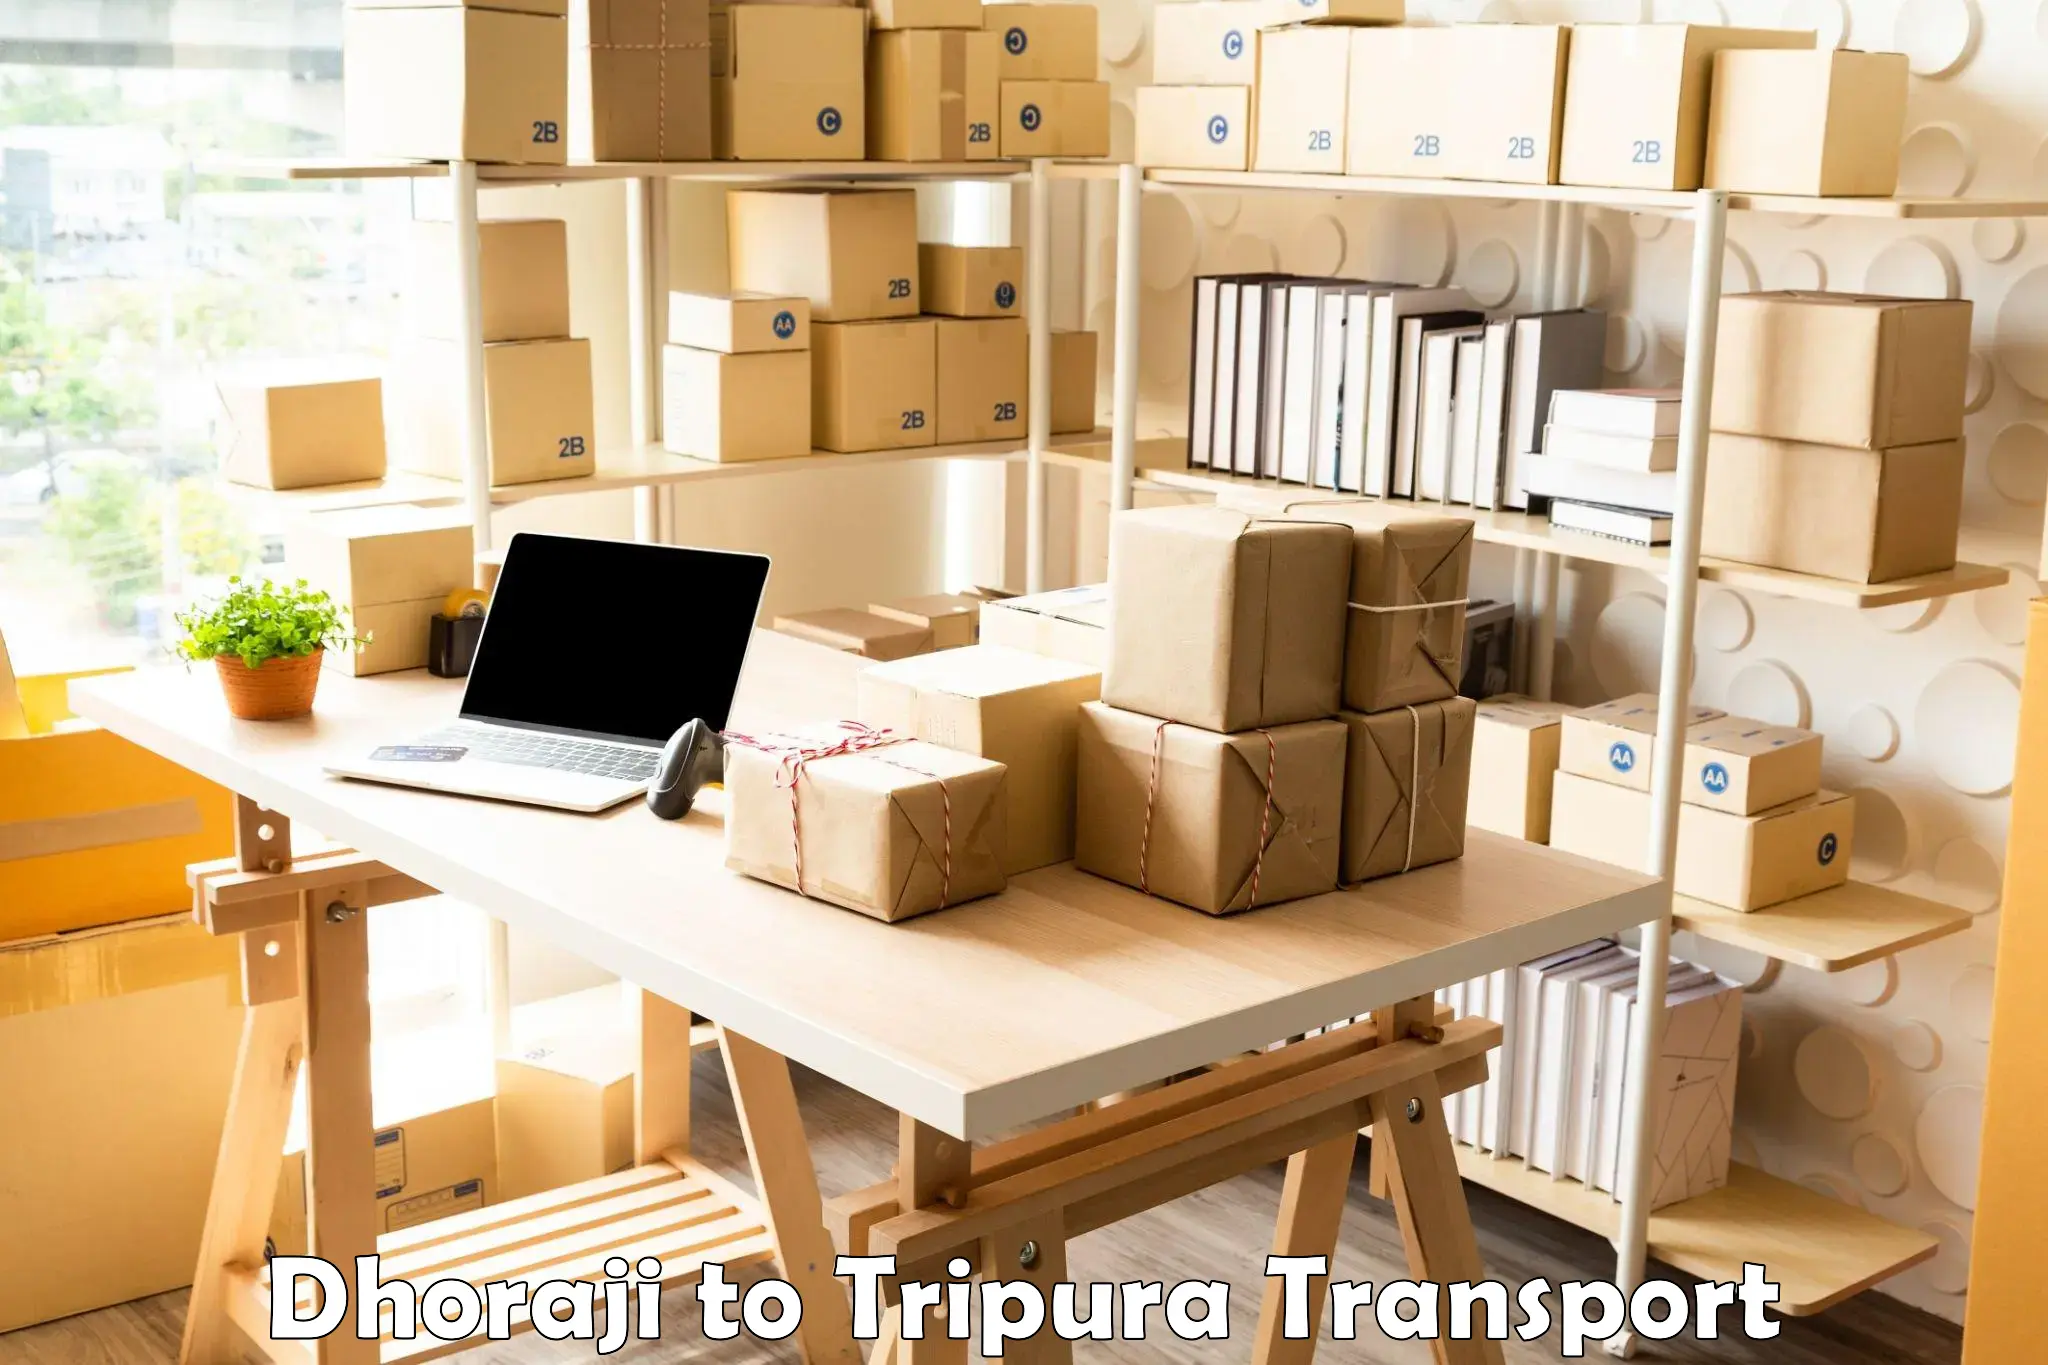 Air freight transport services Dhoraji to Udaipur Tripura